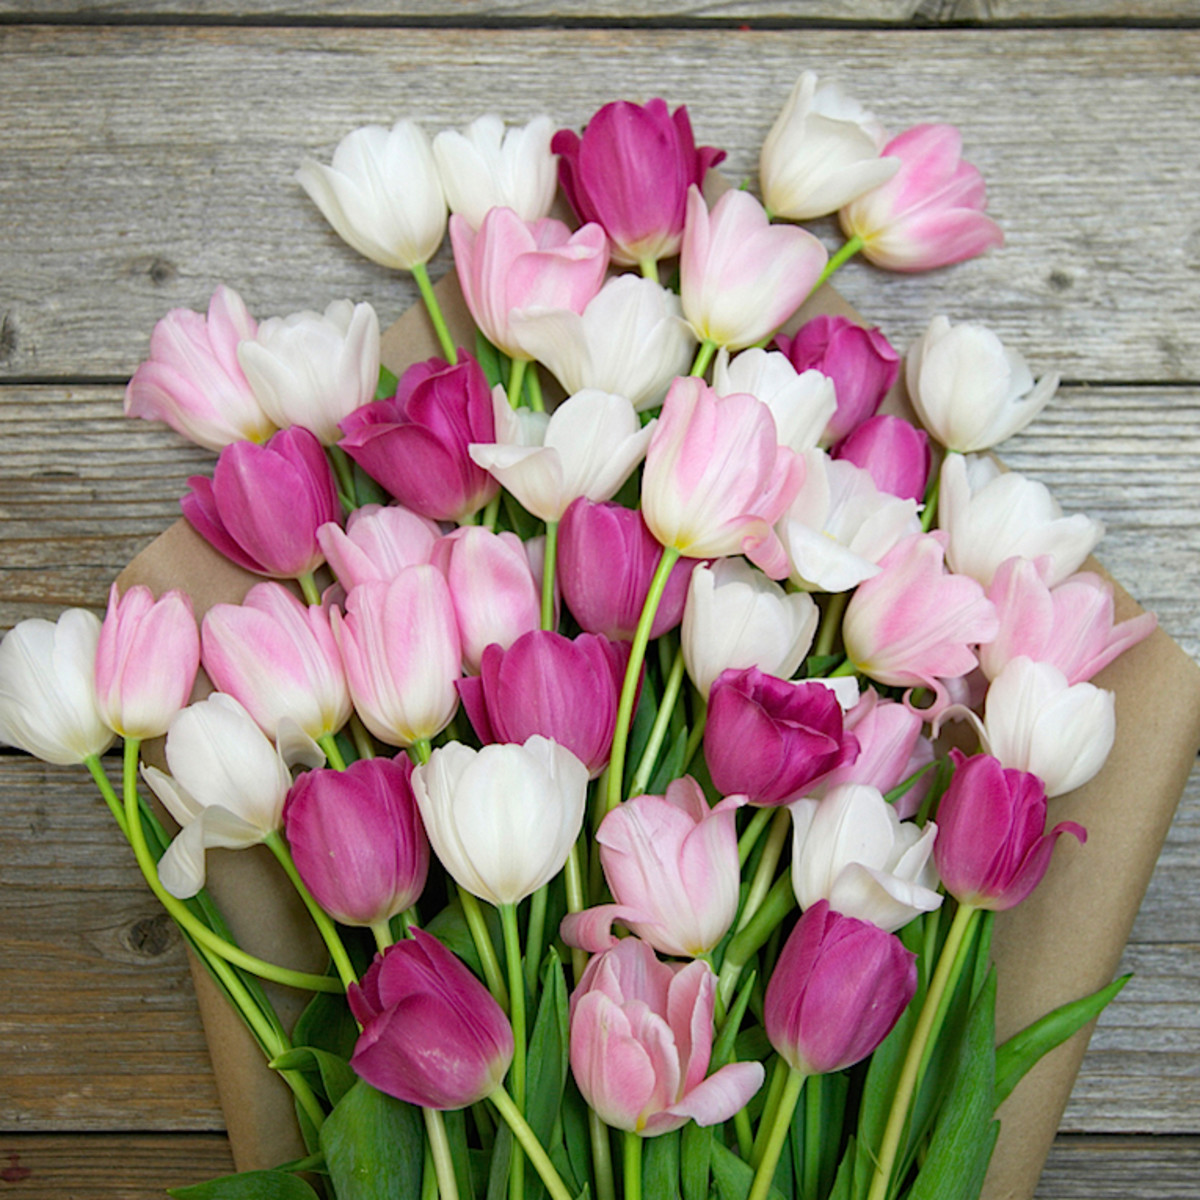 the-bouquet-of-tulips